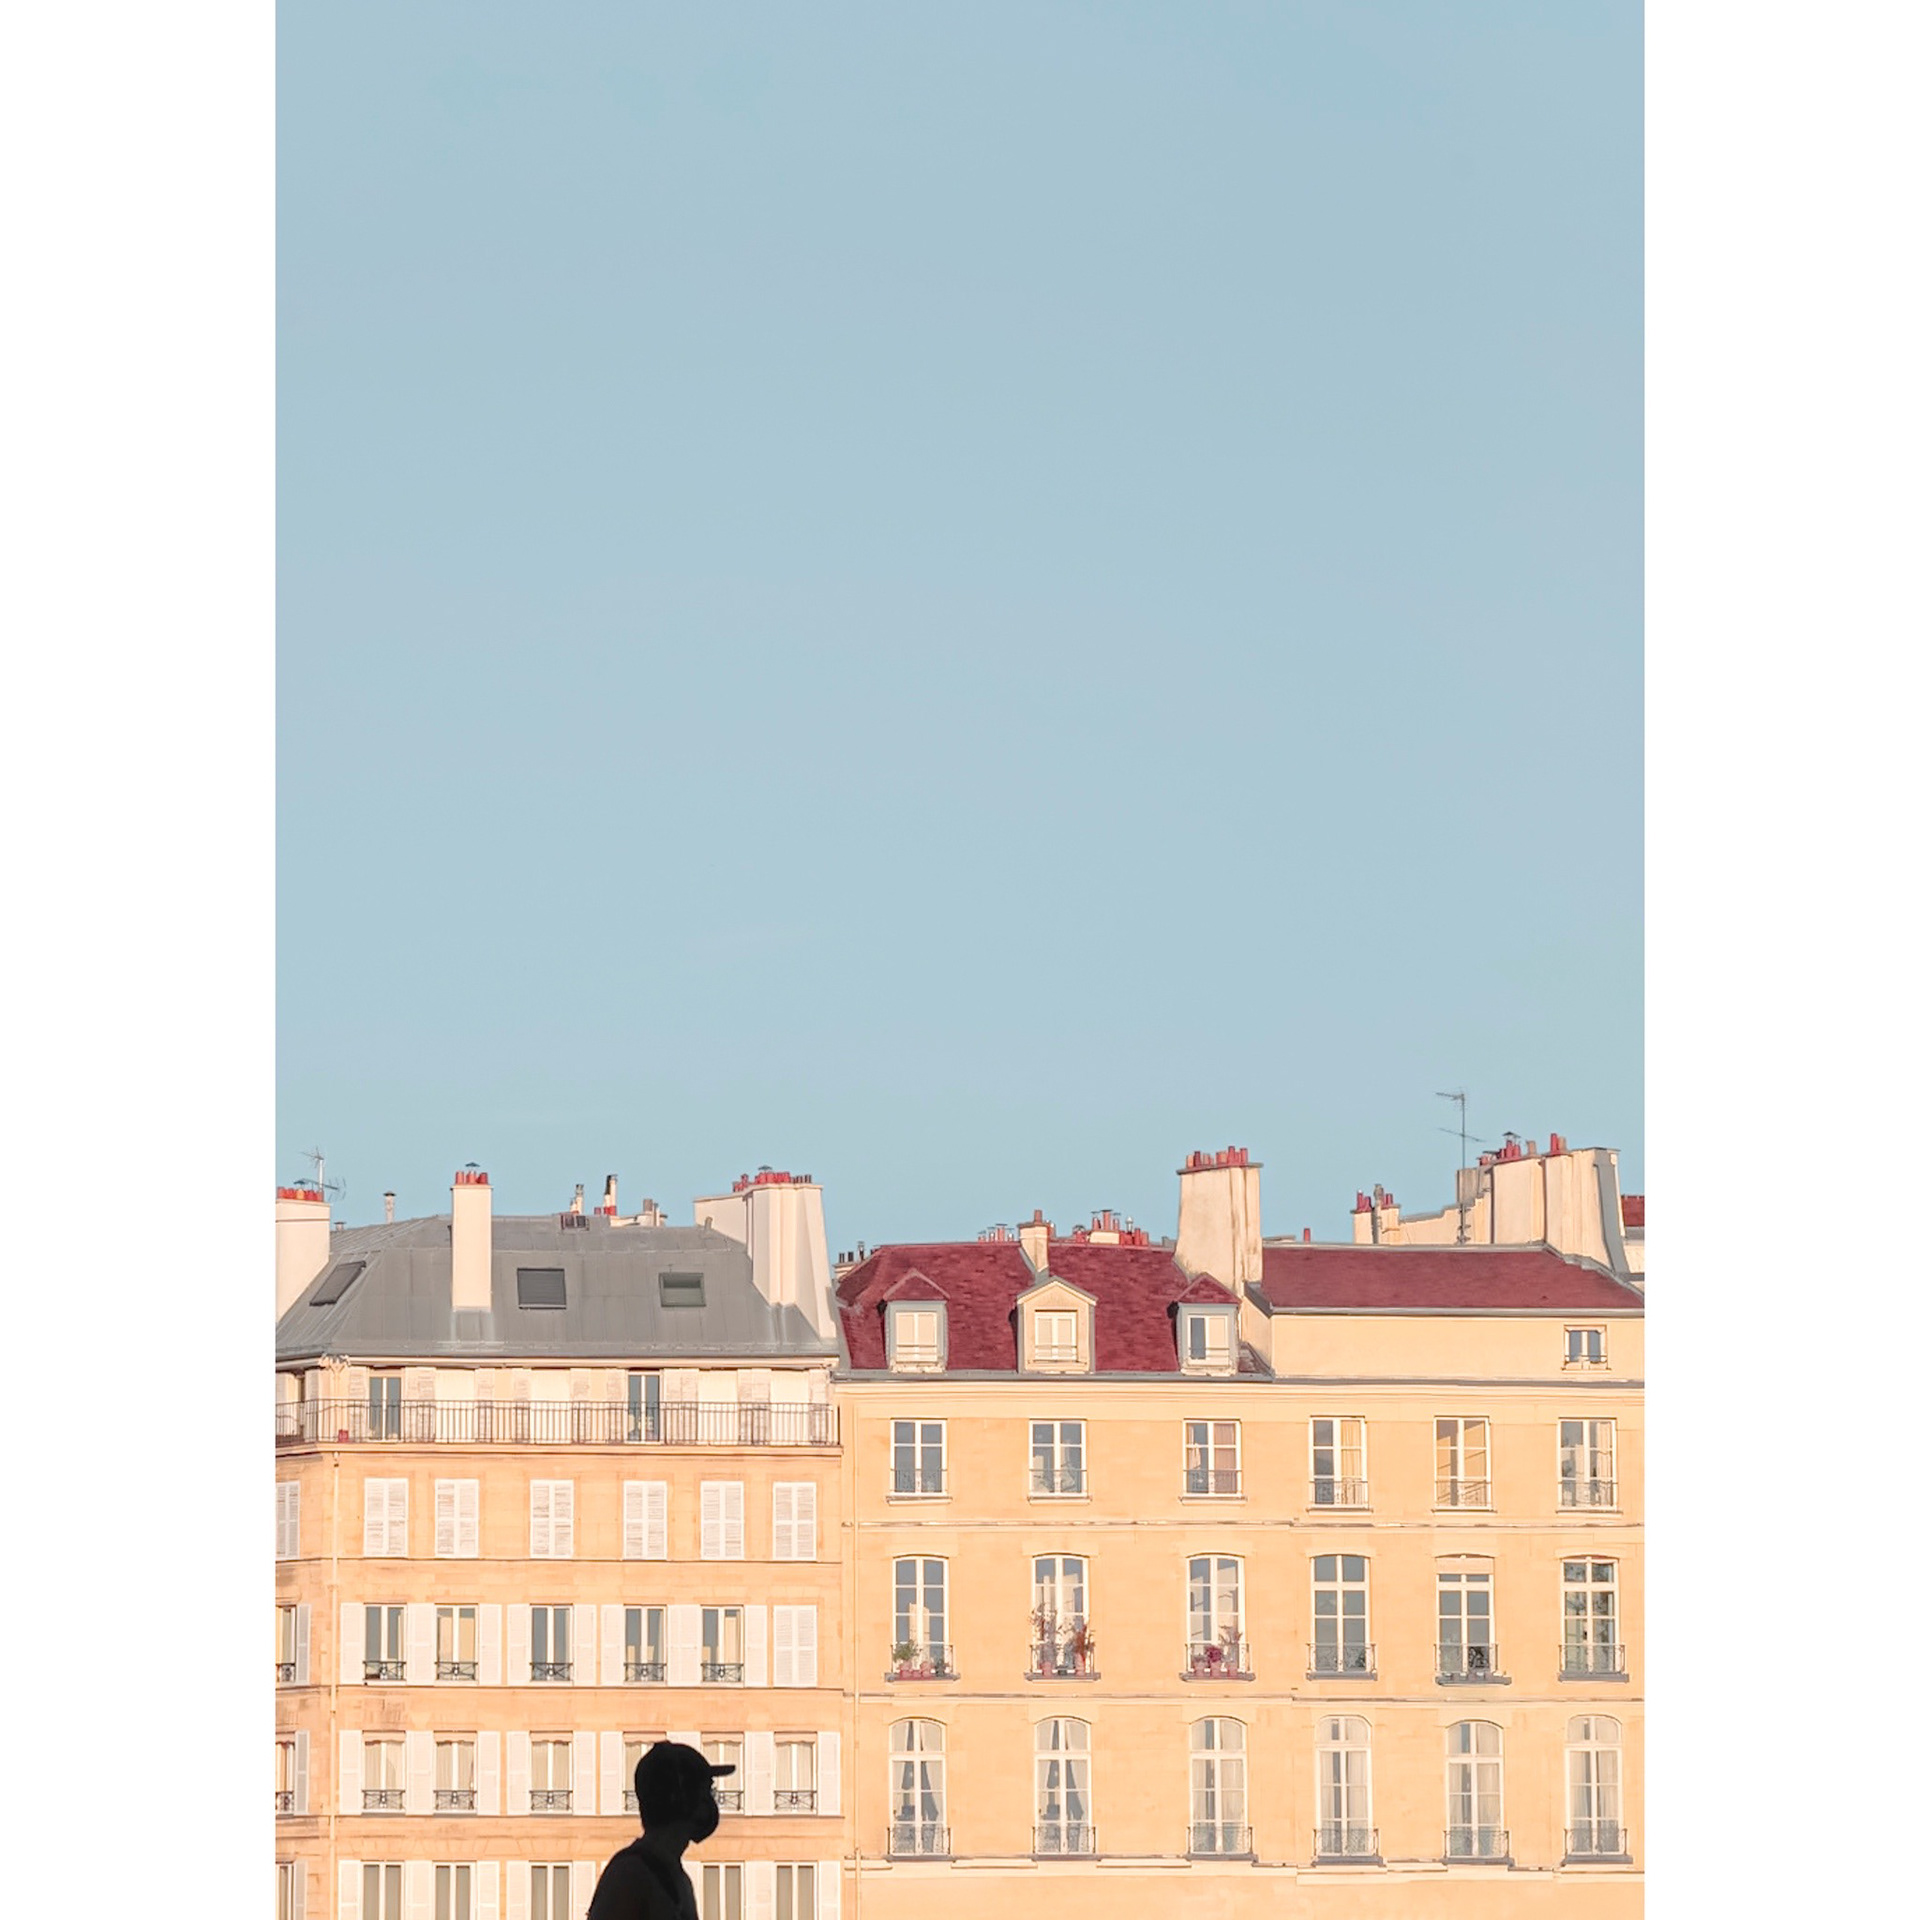 Tiny silhouette in front of a facade with a typical parisian architecture. Minimal and inspiring street photography look. 2021, Paris, France 